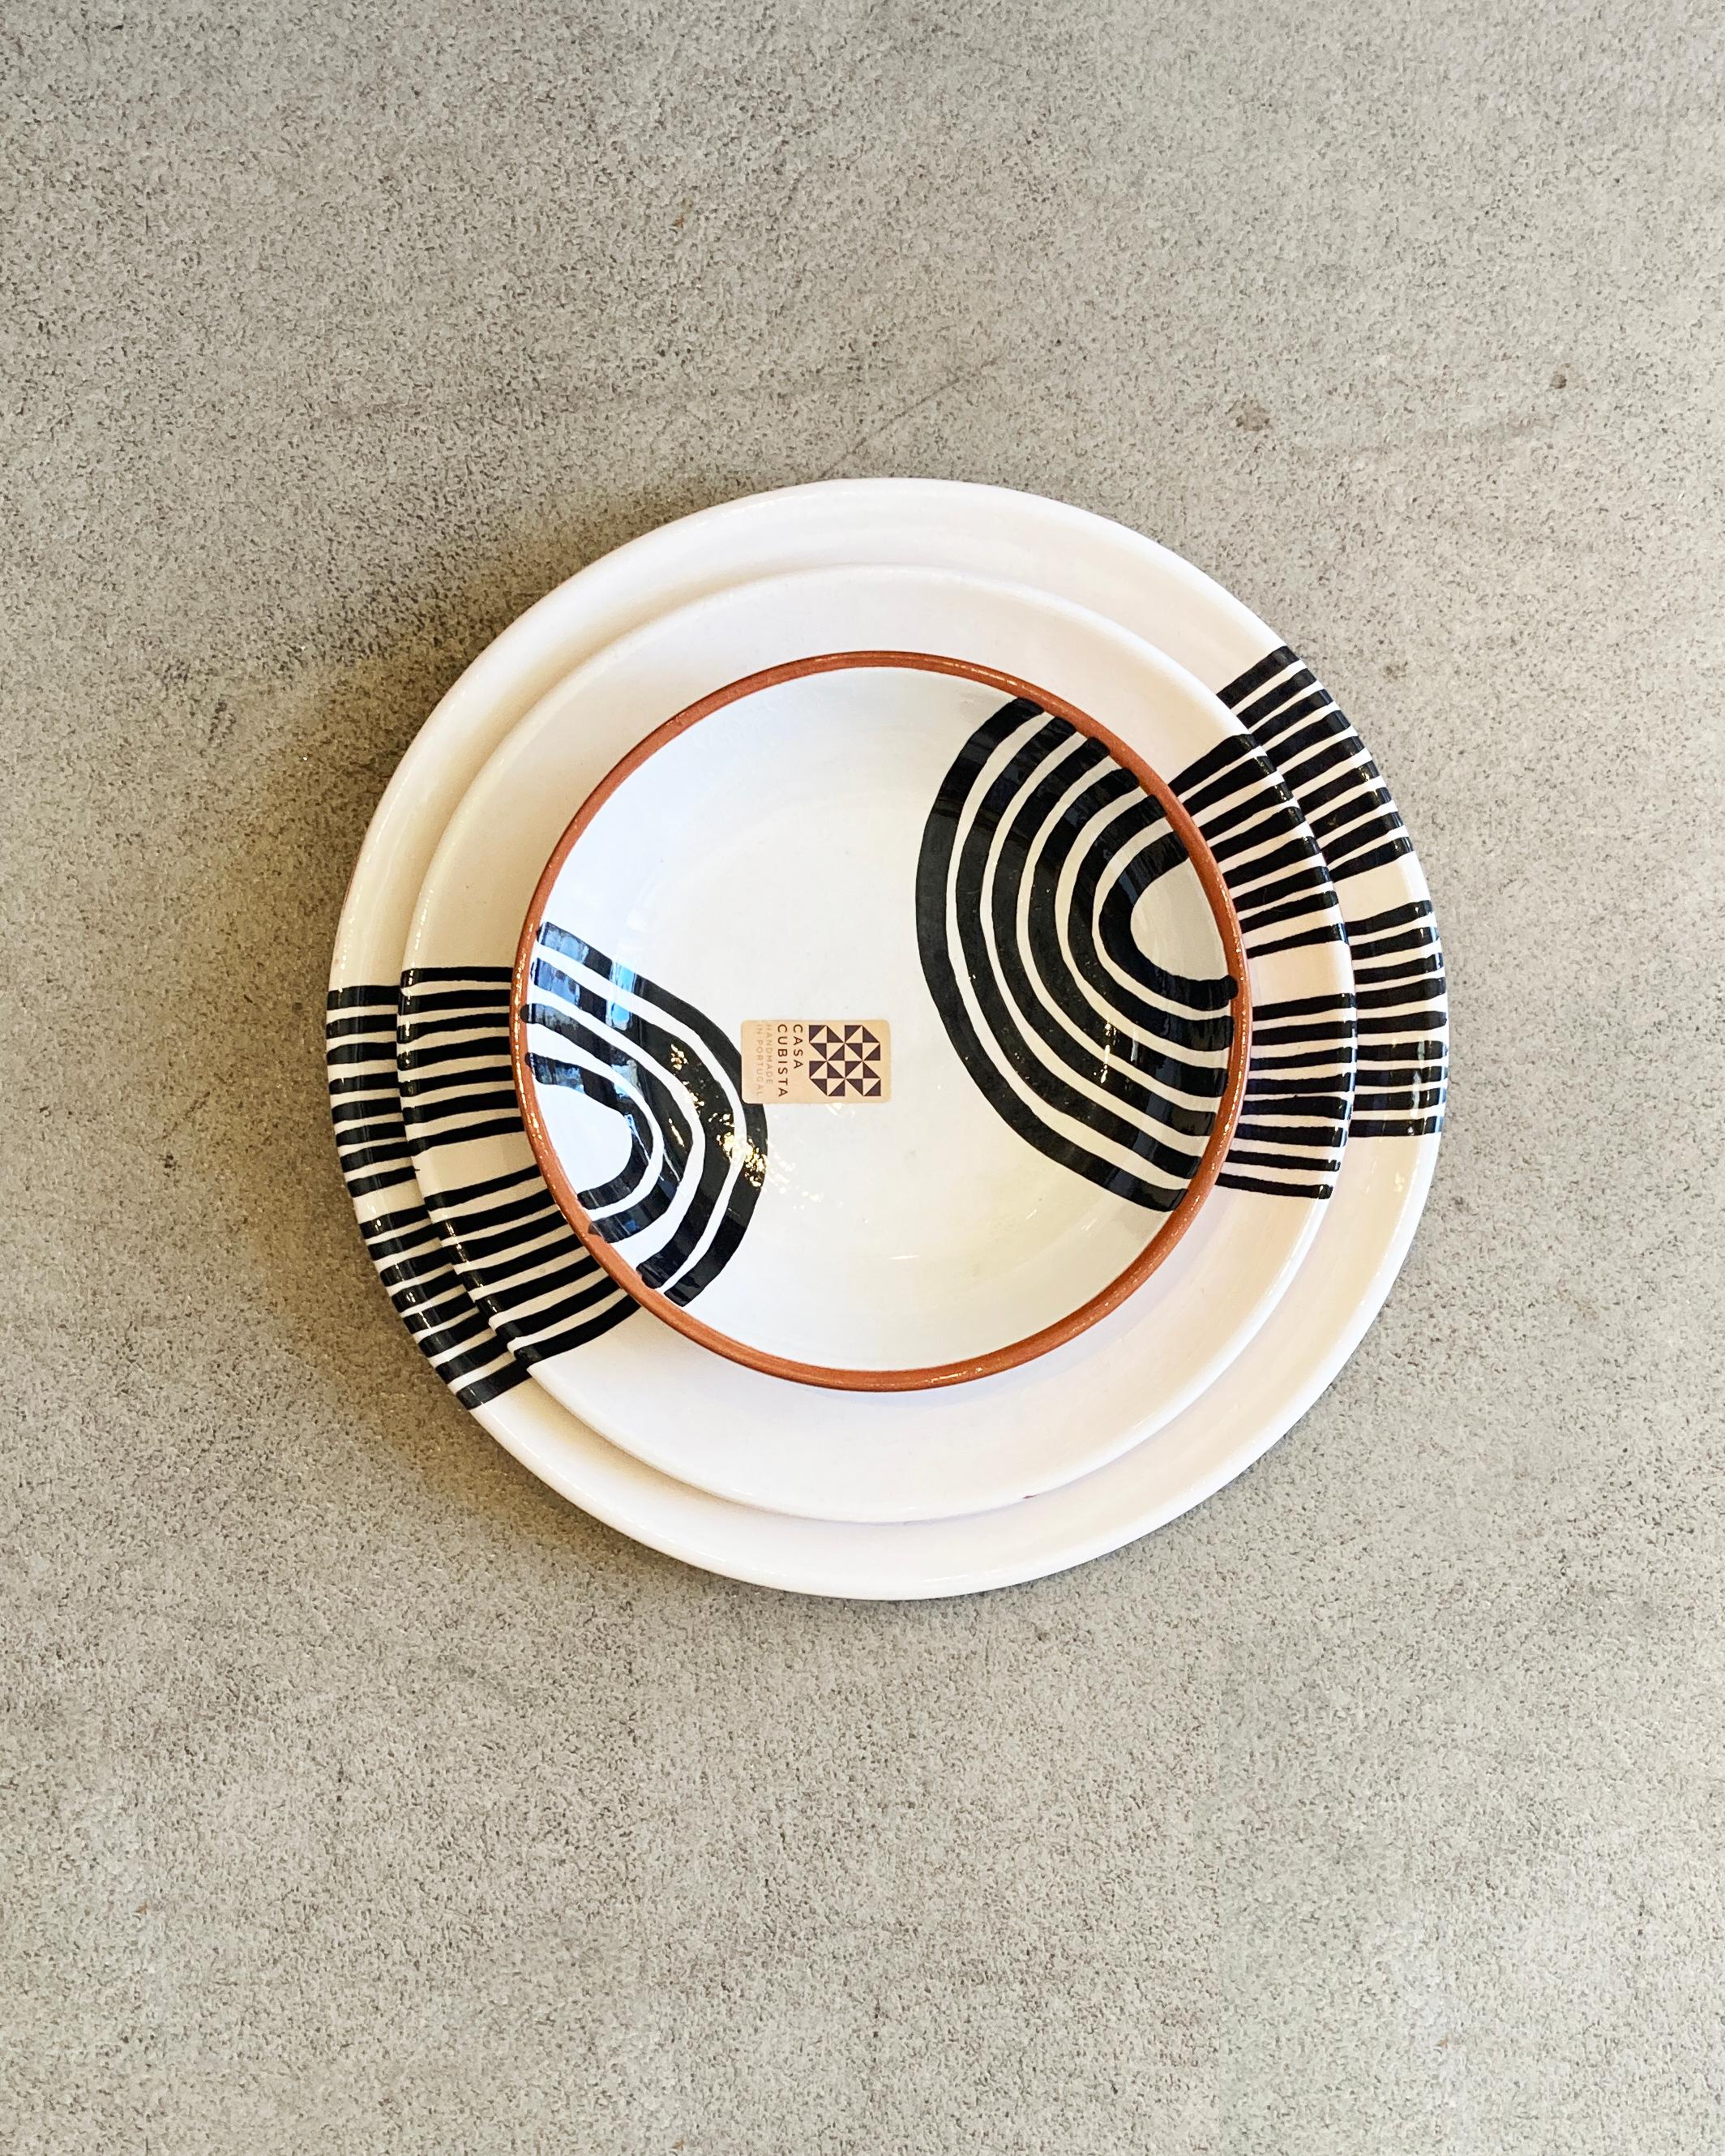 Handmade and hand painted ceramics from one of the mother countries, Portugal, these beautiful pieces for your table will add a modern and graphic touch and are perfect to mix and match. 

Sizes
Dinner Plate: 10.5”dia x 1.2”high
Salad Plate: